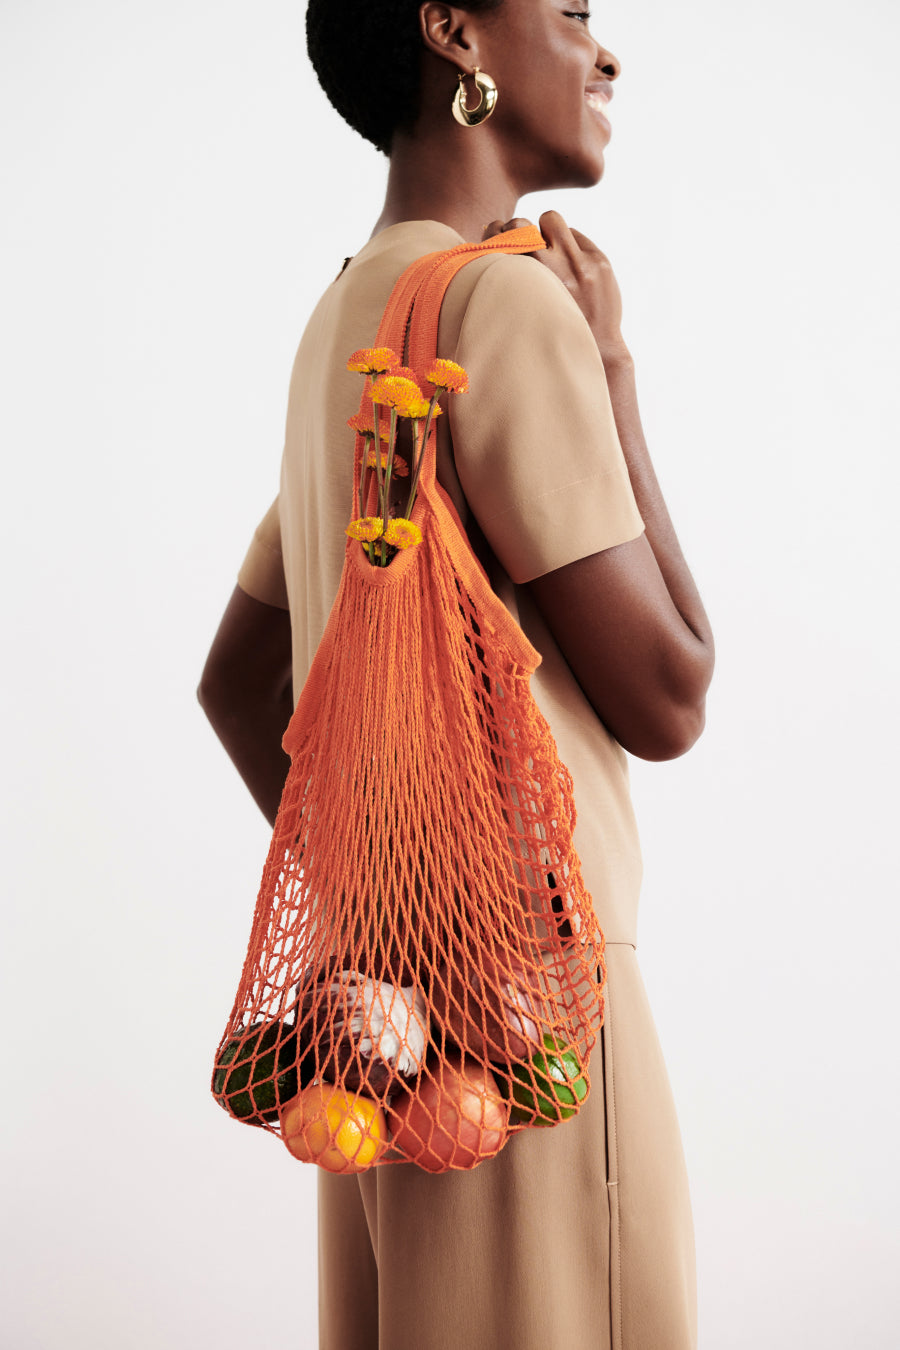 image of a woman wearing the annika top and elena culotte in light saddle holding a mesh bag of fruit